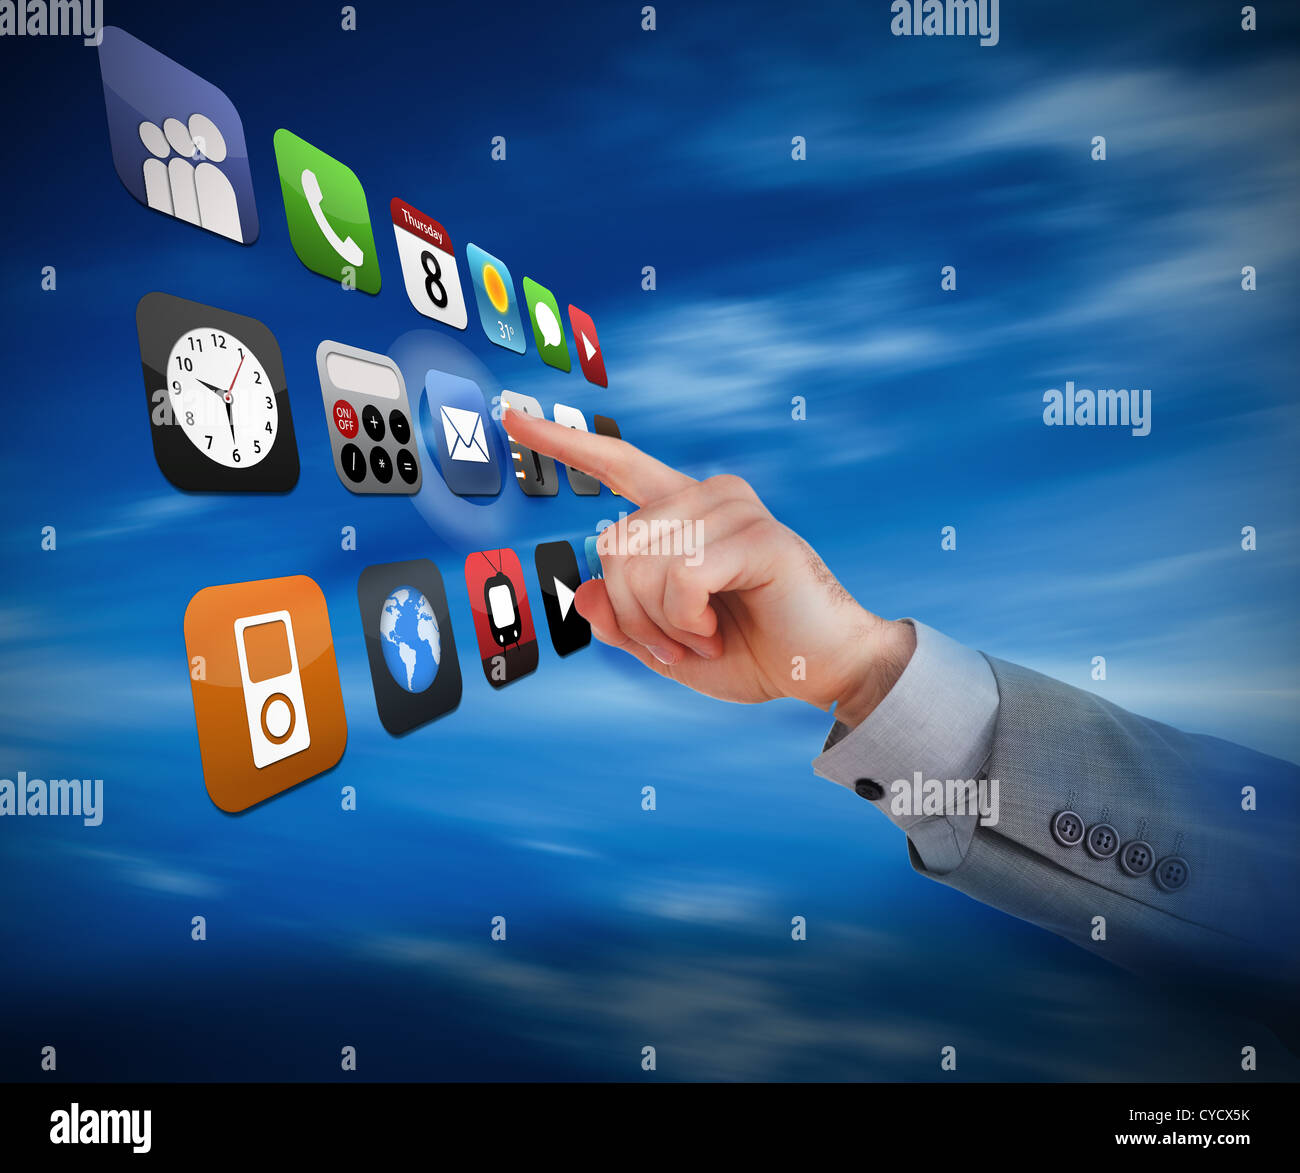 Businessman selecting email application from holographic interface Stock Photo